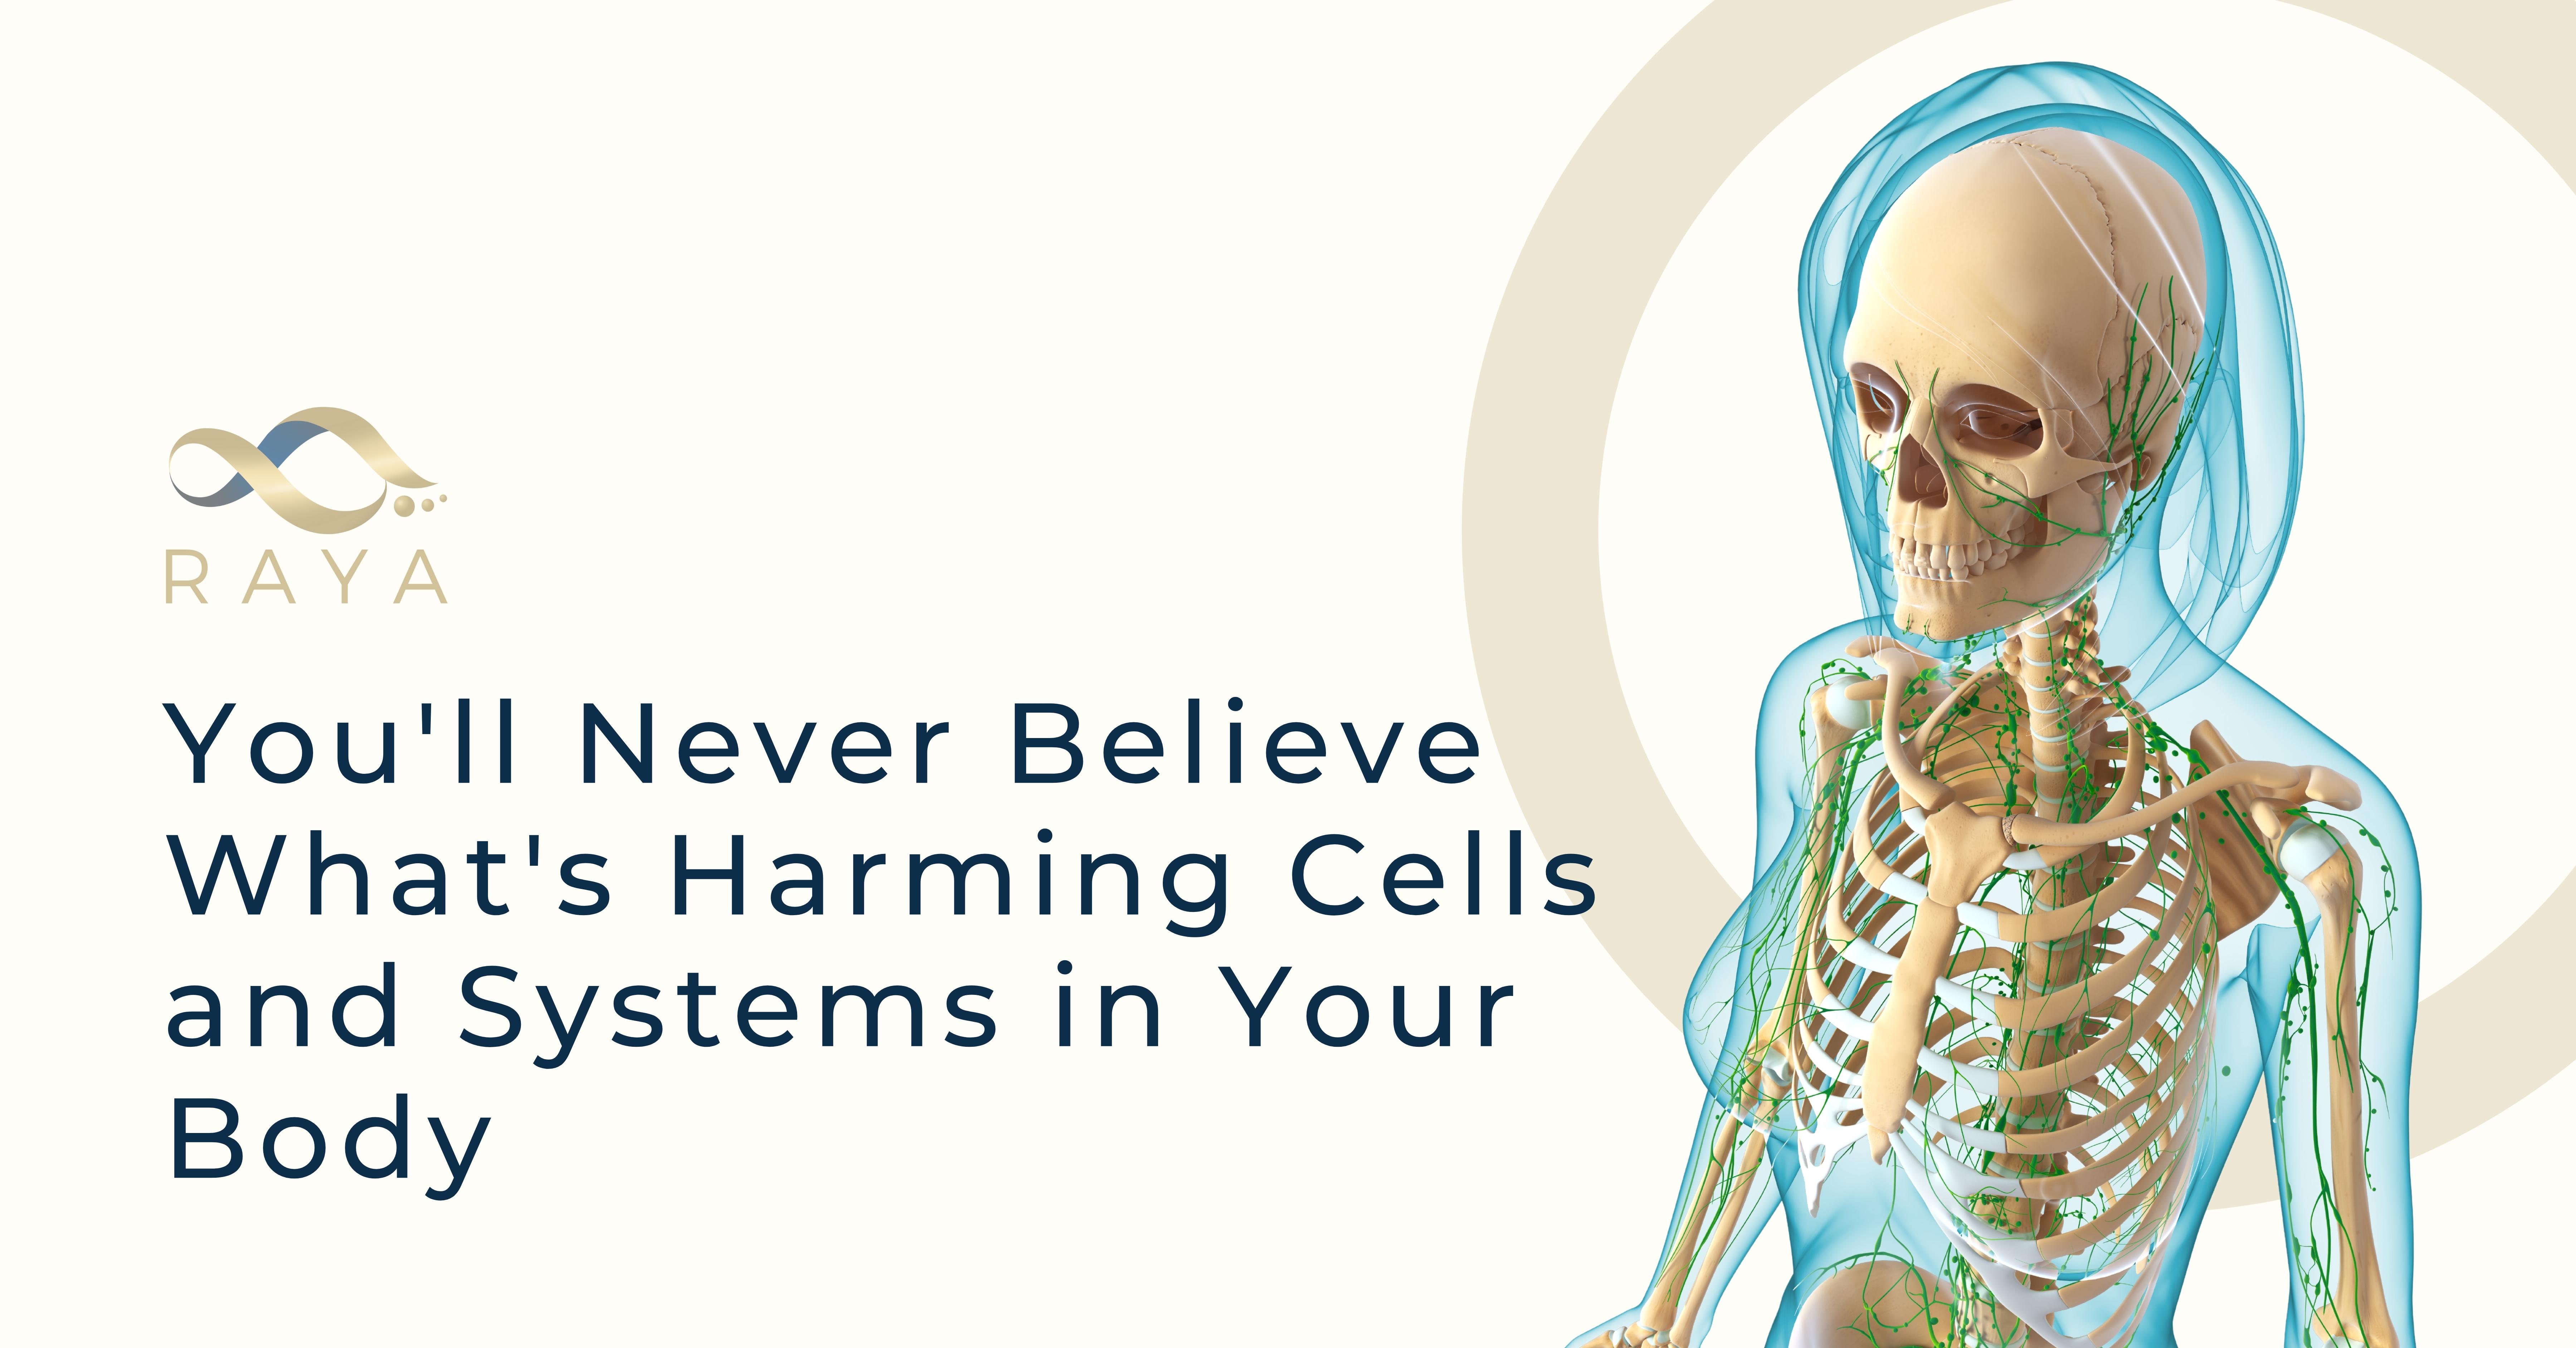 You’ll Never Believe What’s Harming Cells and Systems in Your Body